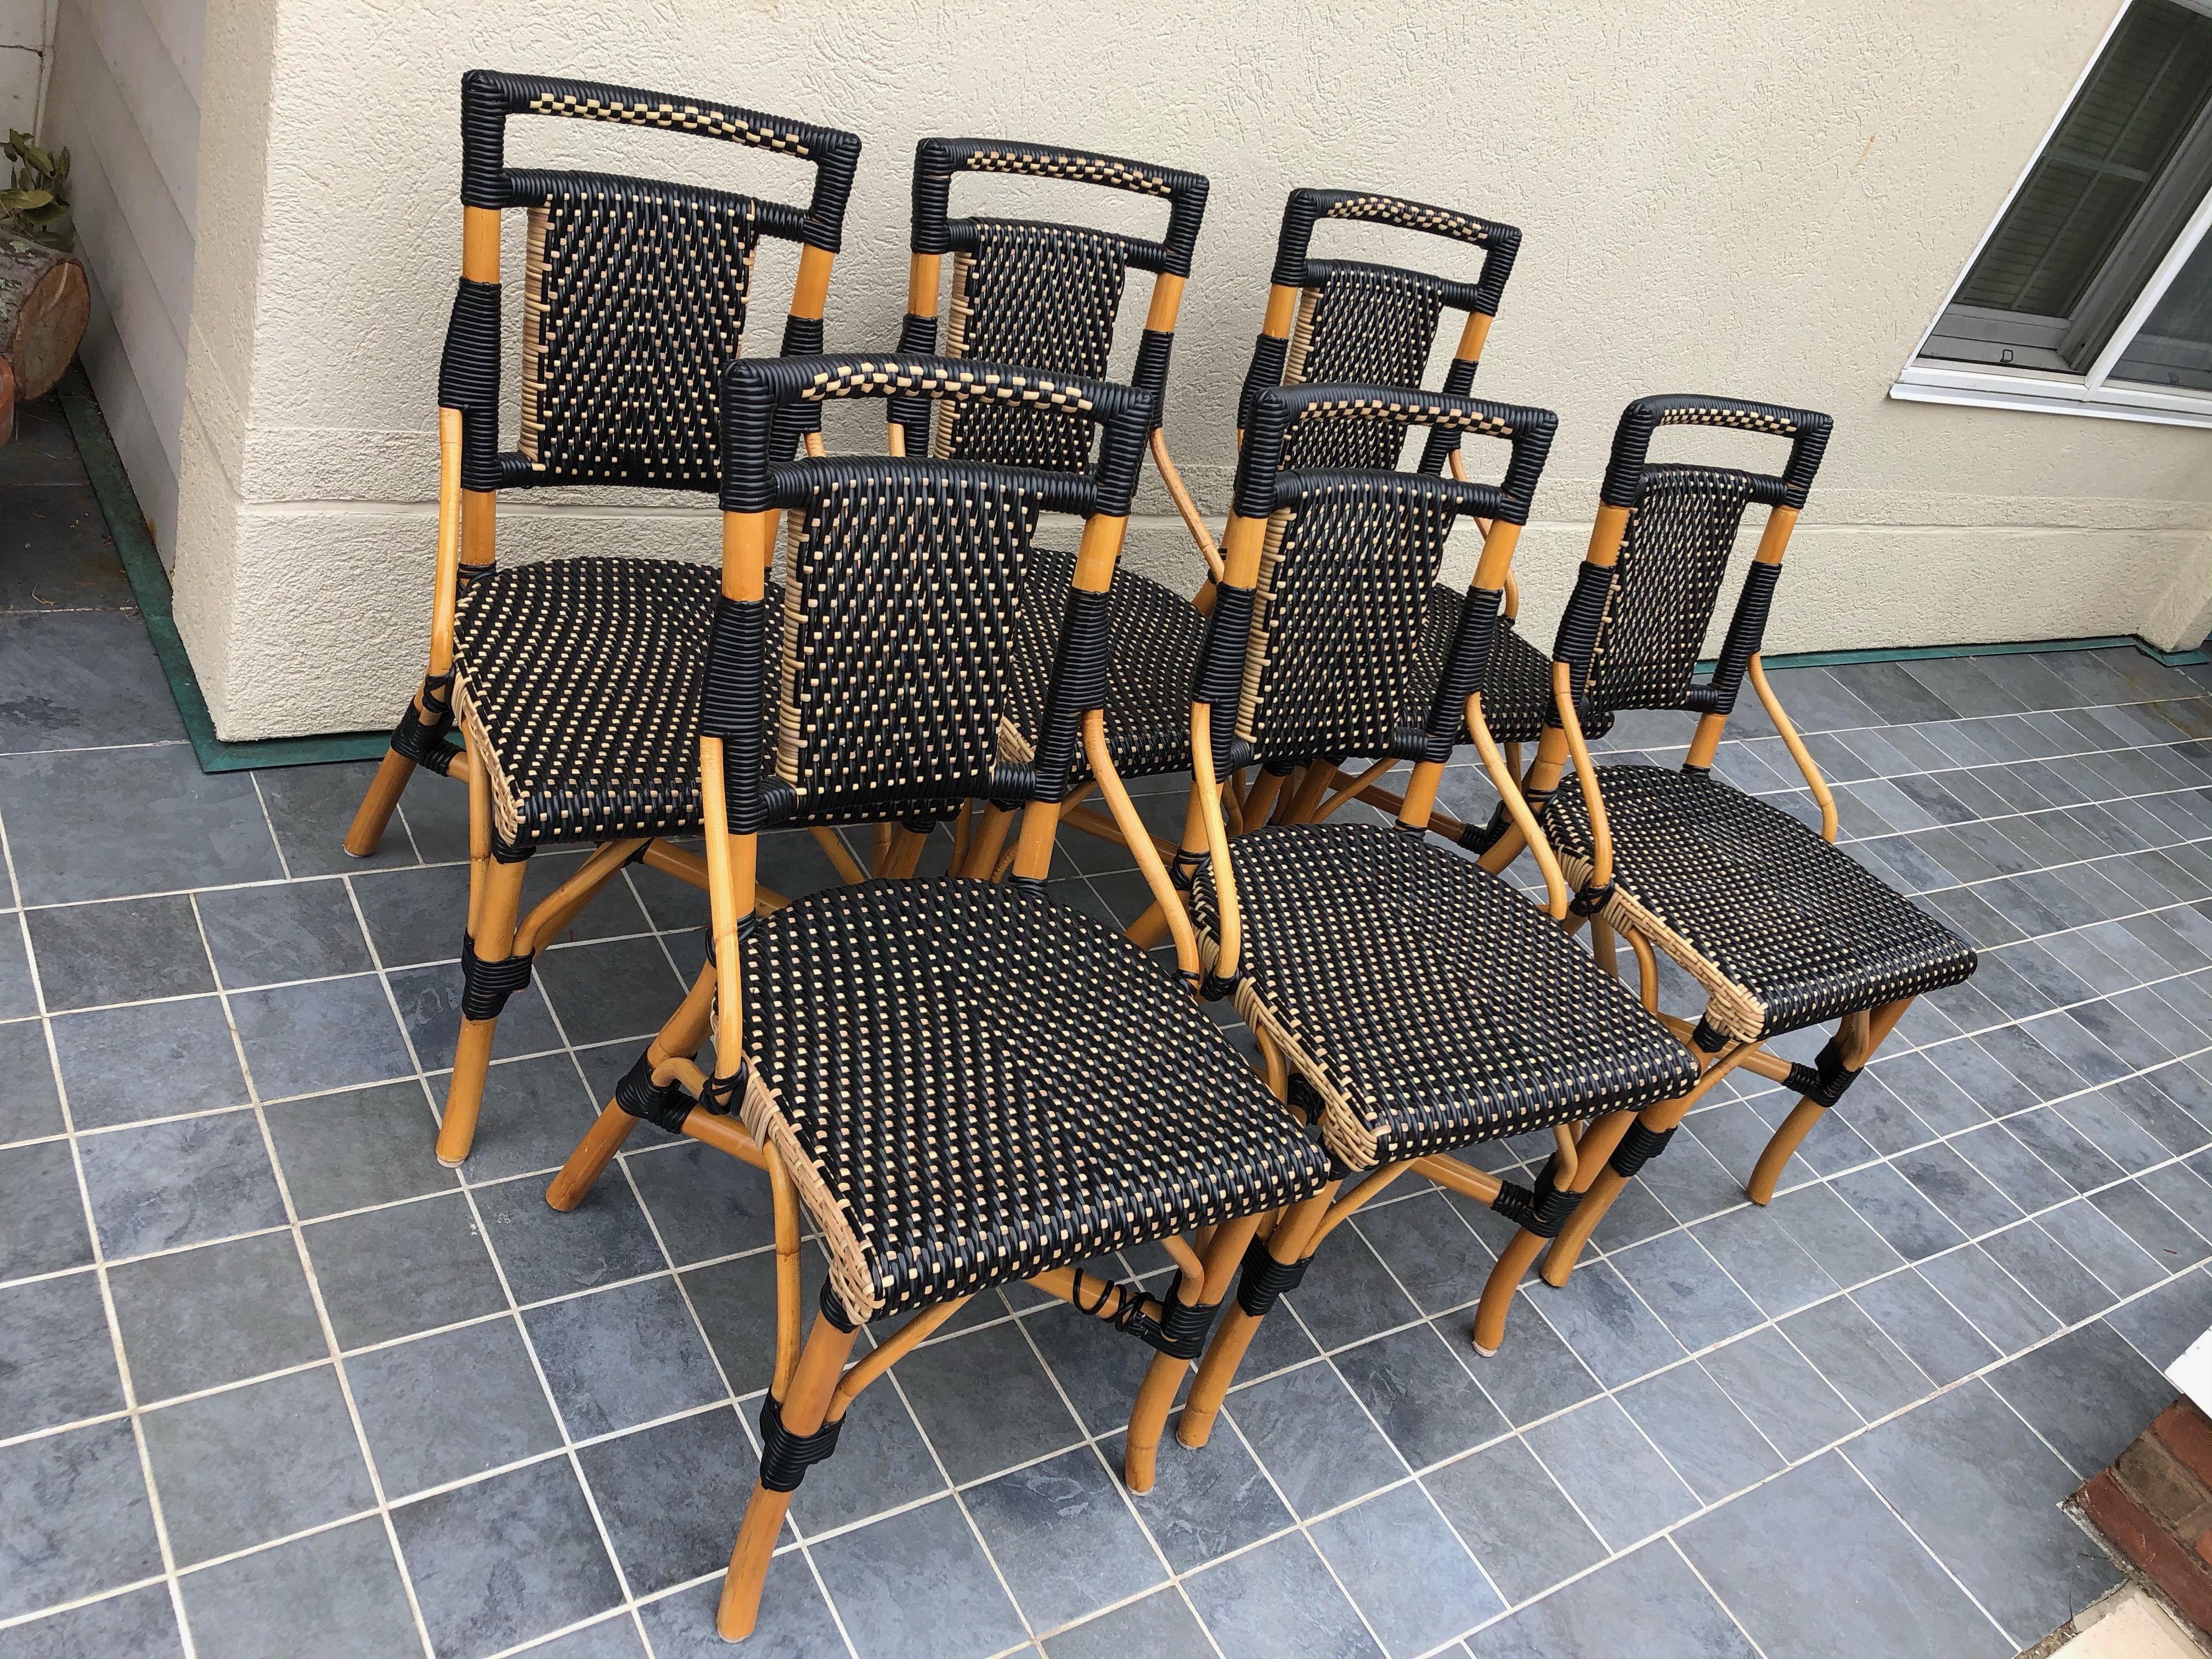 Handsome set of 6 bistro style chairs by Palecek constructed with bamboo rattan poles, wicker and synthetic rattan. Seat and back are in stylish contrasting black and beige colored pattern. Bamboo poles are a light honey color. 
Measures: seat